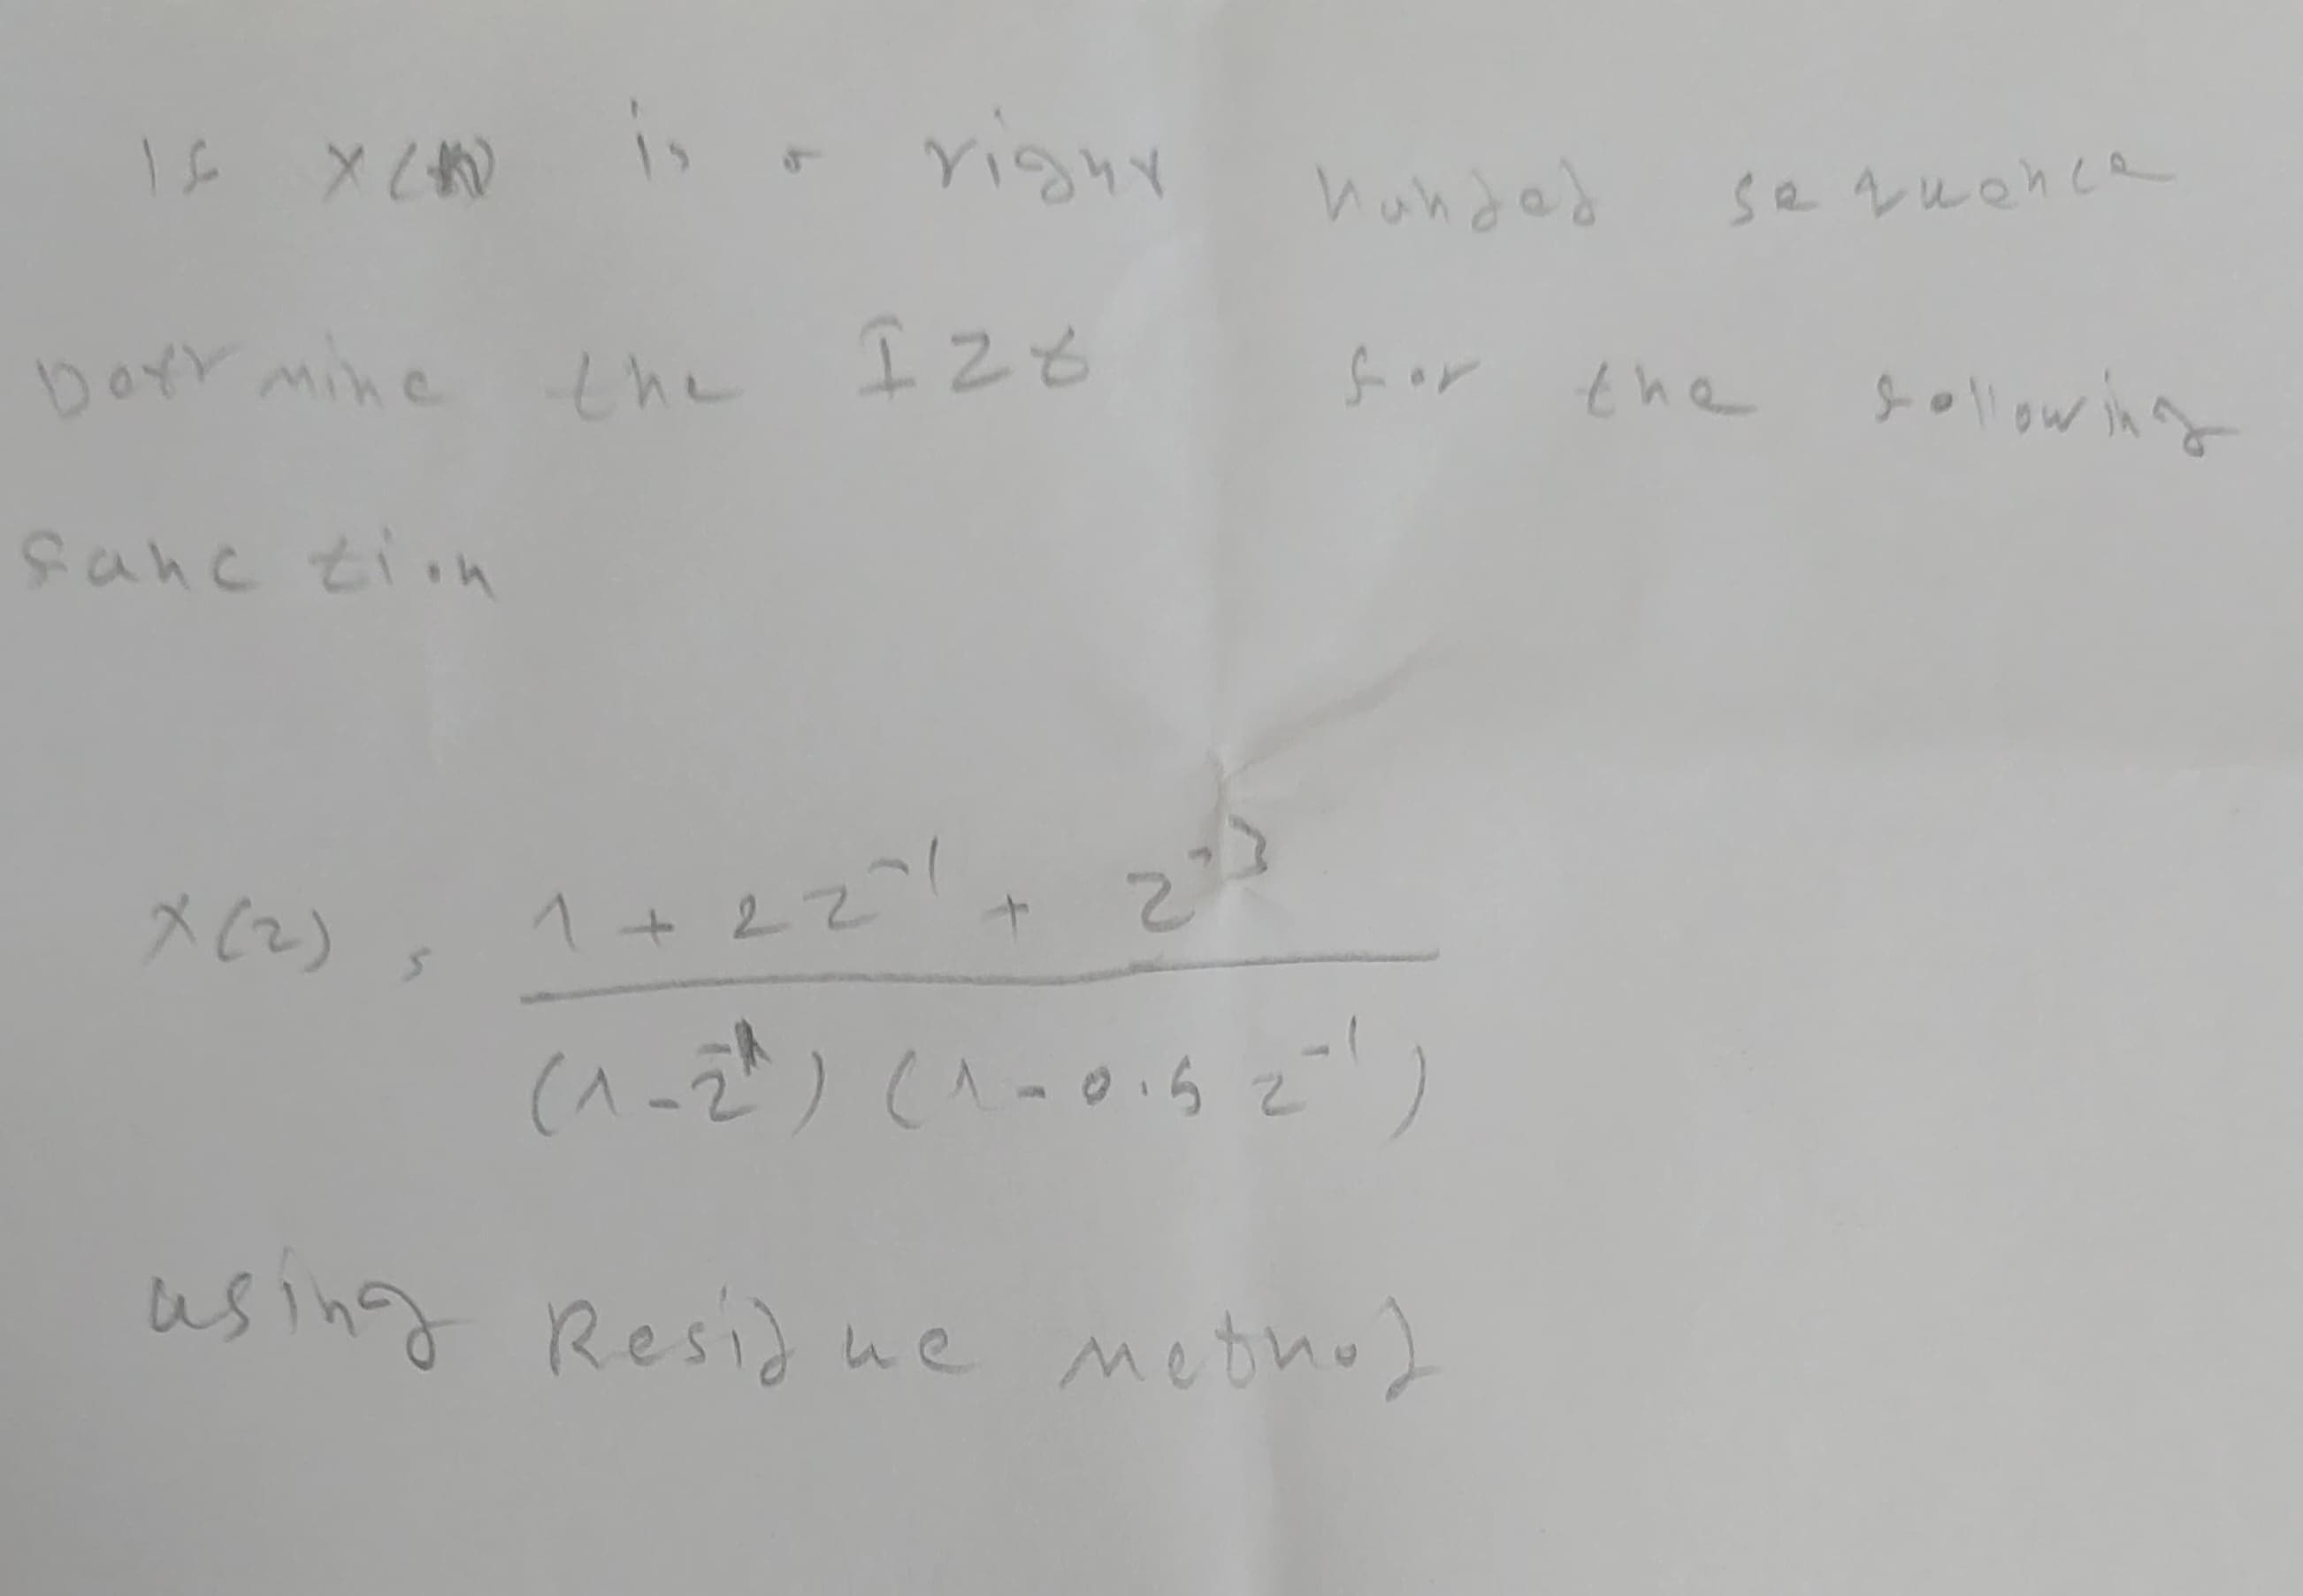 If X² is right
Der mine the 128
fanc tion
handed
Sequence
for the
1 +22² +
27
(^-2²) (^-0-52¹)
using Residue metho)
following